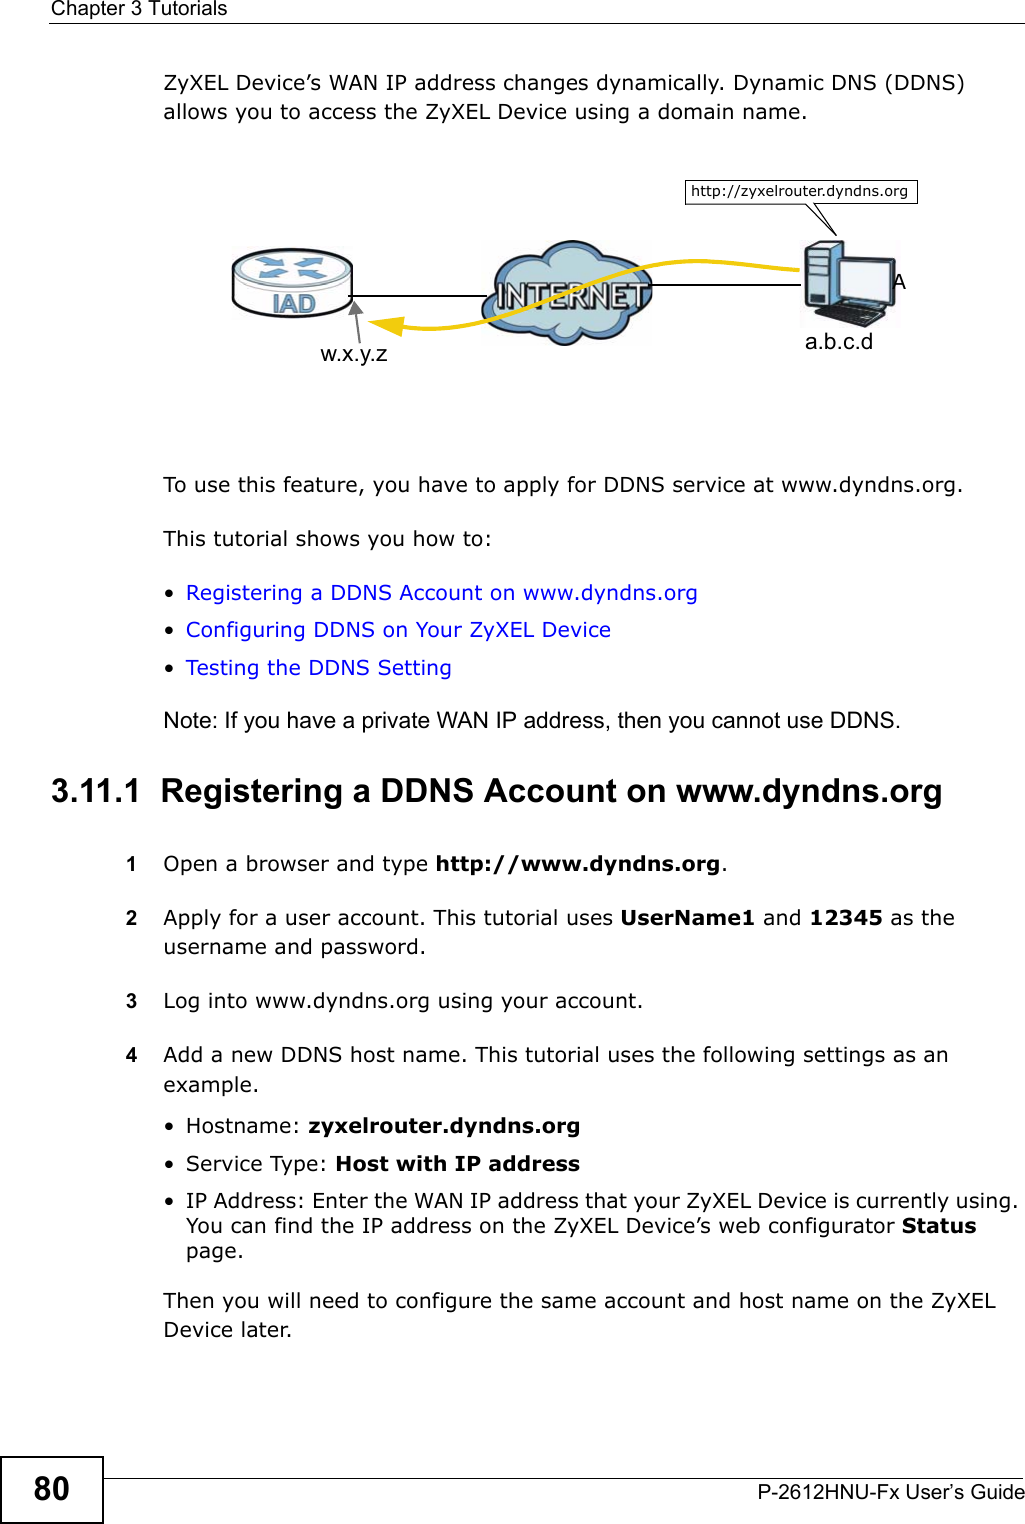 Chapter 3 TutorialsP-2612HNU-Fx User’s Guide80ZyXEL Device’s WAN IP address changes dynamically. Dynamic DNS (DDNS) allows you to access the ZyXEL Device using a domain name. To use this feature, you have to apply for DDNS service at www.dyndns.org.This tutorial shows you how to:•Registering a DDNS Account on www.dyndns.org•Configuring DDNS on Your ZyXEL Device•Testing the DDNS SettingNote: If you have a private WAN IP address, then you cannot use DDNS.3.11.1  Registering a DDNS Account on www.dyndns.org1Open a browser and type http://www.dyndns.org.2Apply for a user account. This tutorial uses UserName1 and 12345 as the username and password.3Log into www.dyndns.org using your account.4Add a new DDNS host name. This tutorial uses the following settings as an example.• Hostname: zyxelrouter.dyndns.org• Service Type: Host with IP address• IP Address: Enter the WAN IP address that your ZyXEL Device is currently using. You can find the IP address on the ZyXEL Device’s web configurator Statuspage.Then you will need to configure the same account and host name on the ZyXEL Device later.w.x.y.z a.b.c.dhttp://zyxelrouter.dyndns.orgA